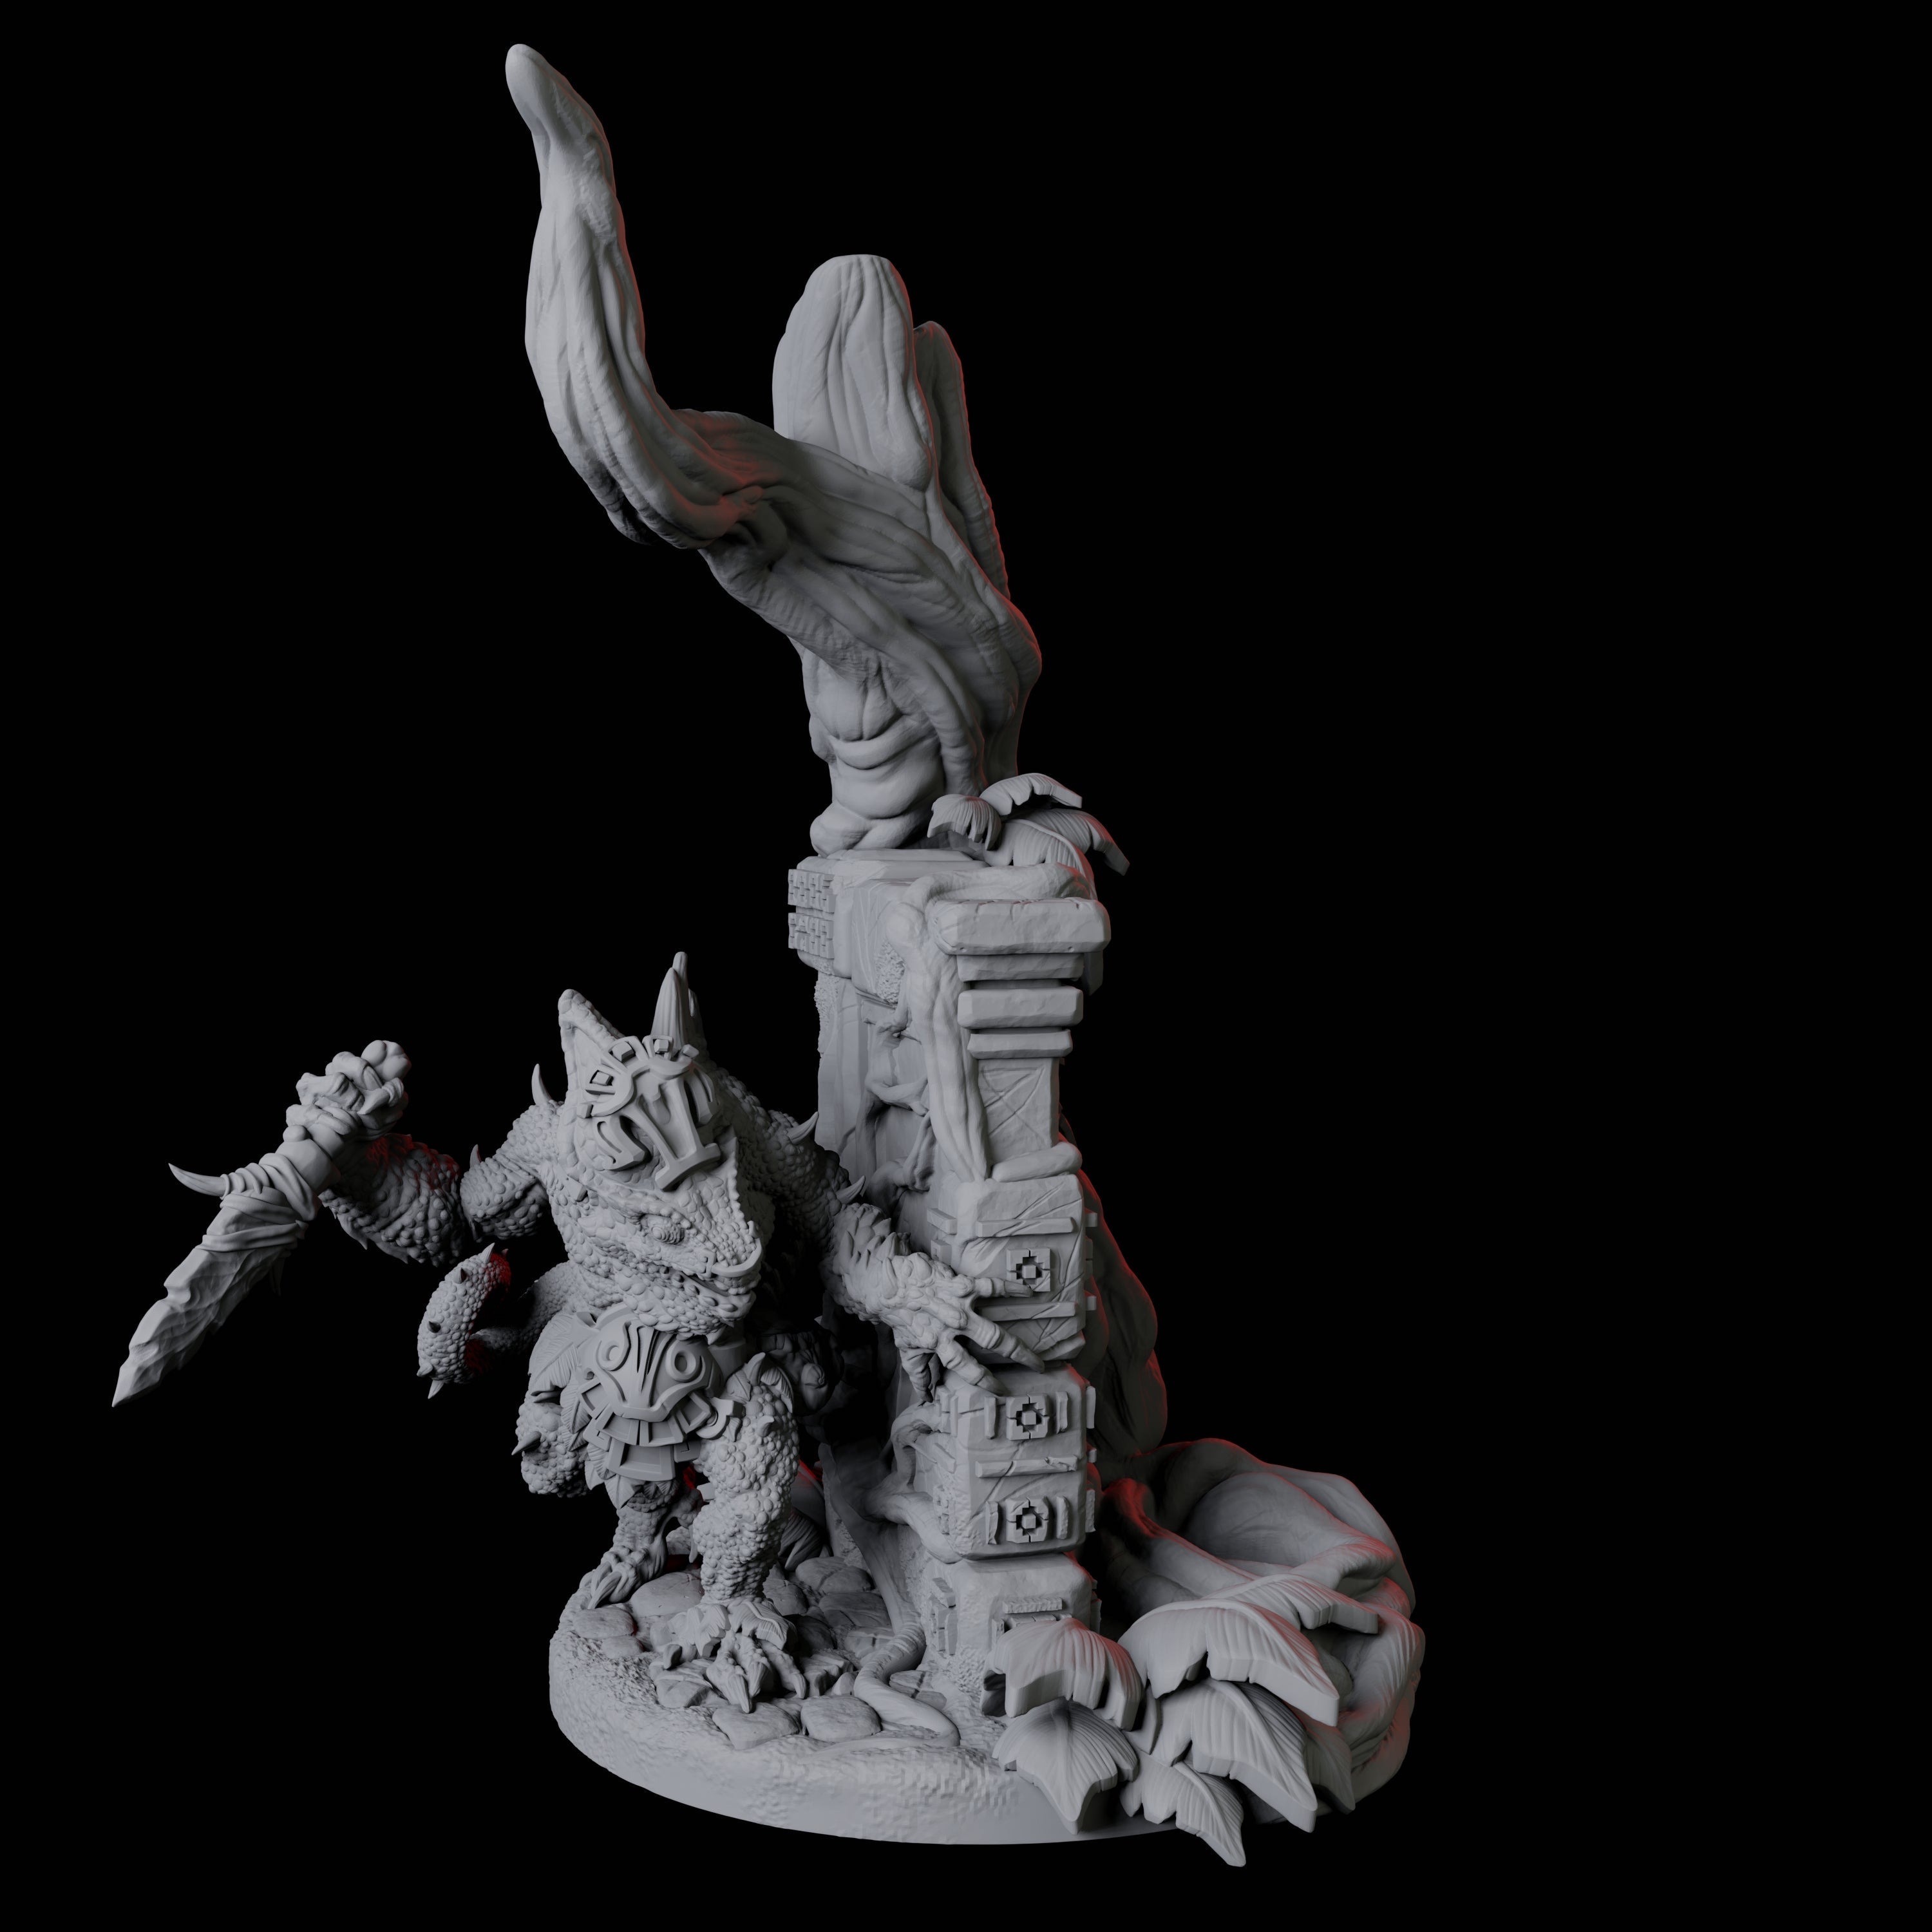 Grung Rogue A Miniature for Dungeons and Dragons, Pathfinder or other TTRPGs